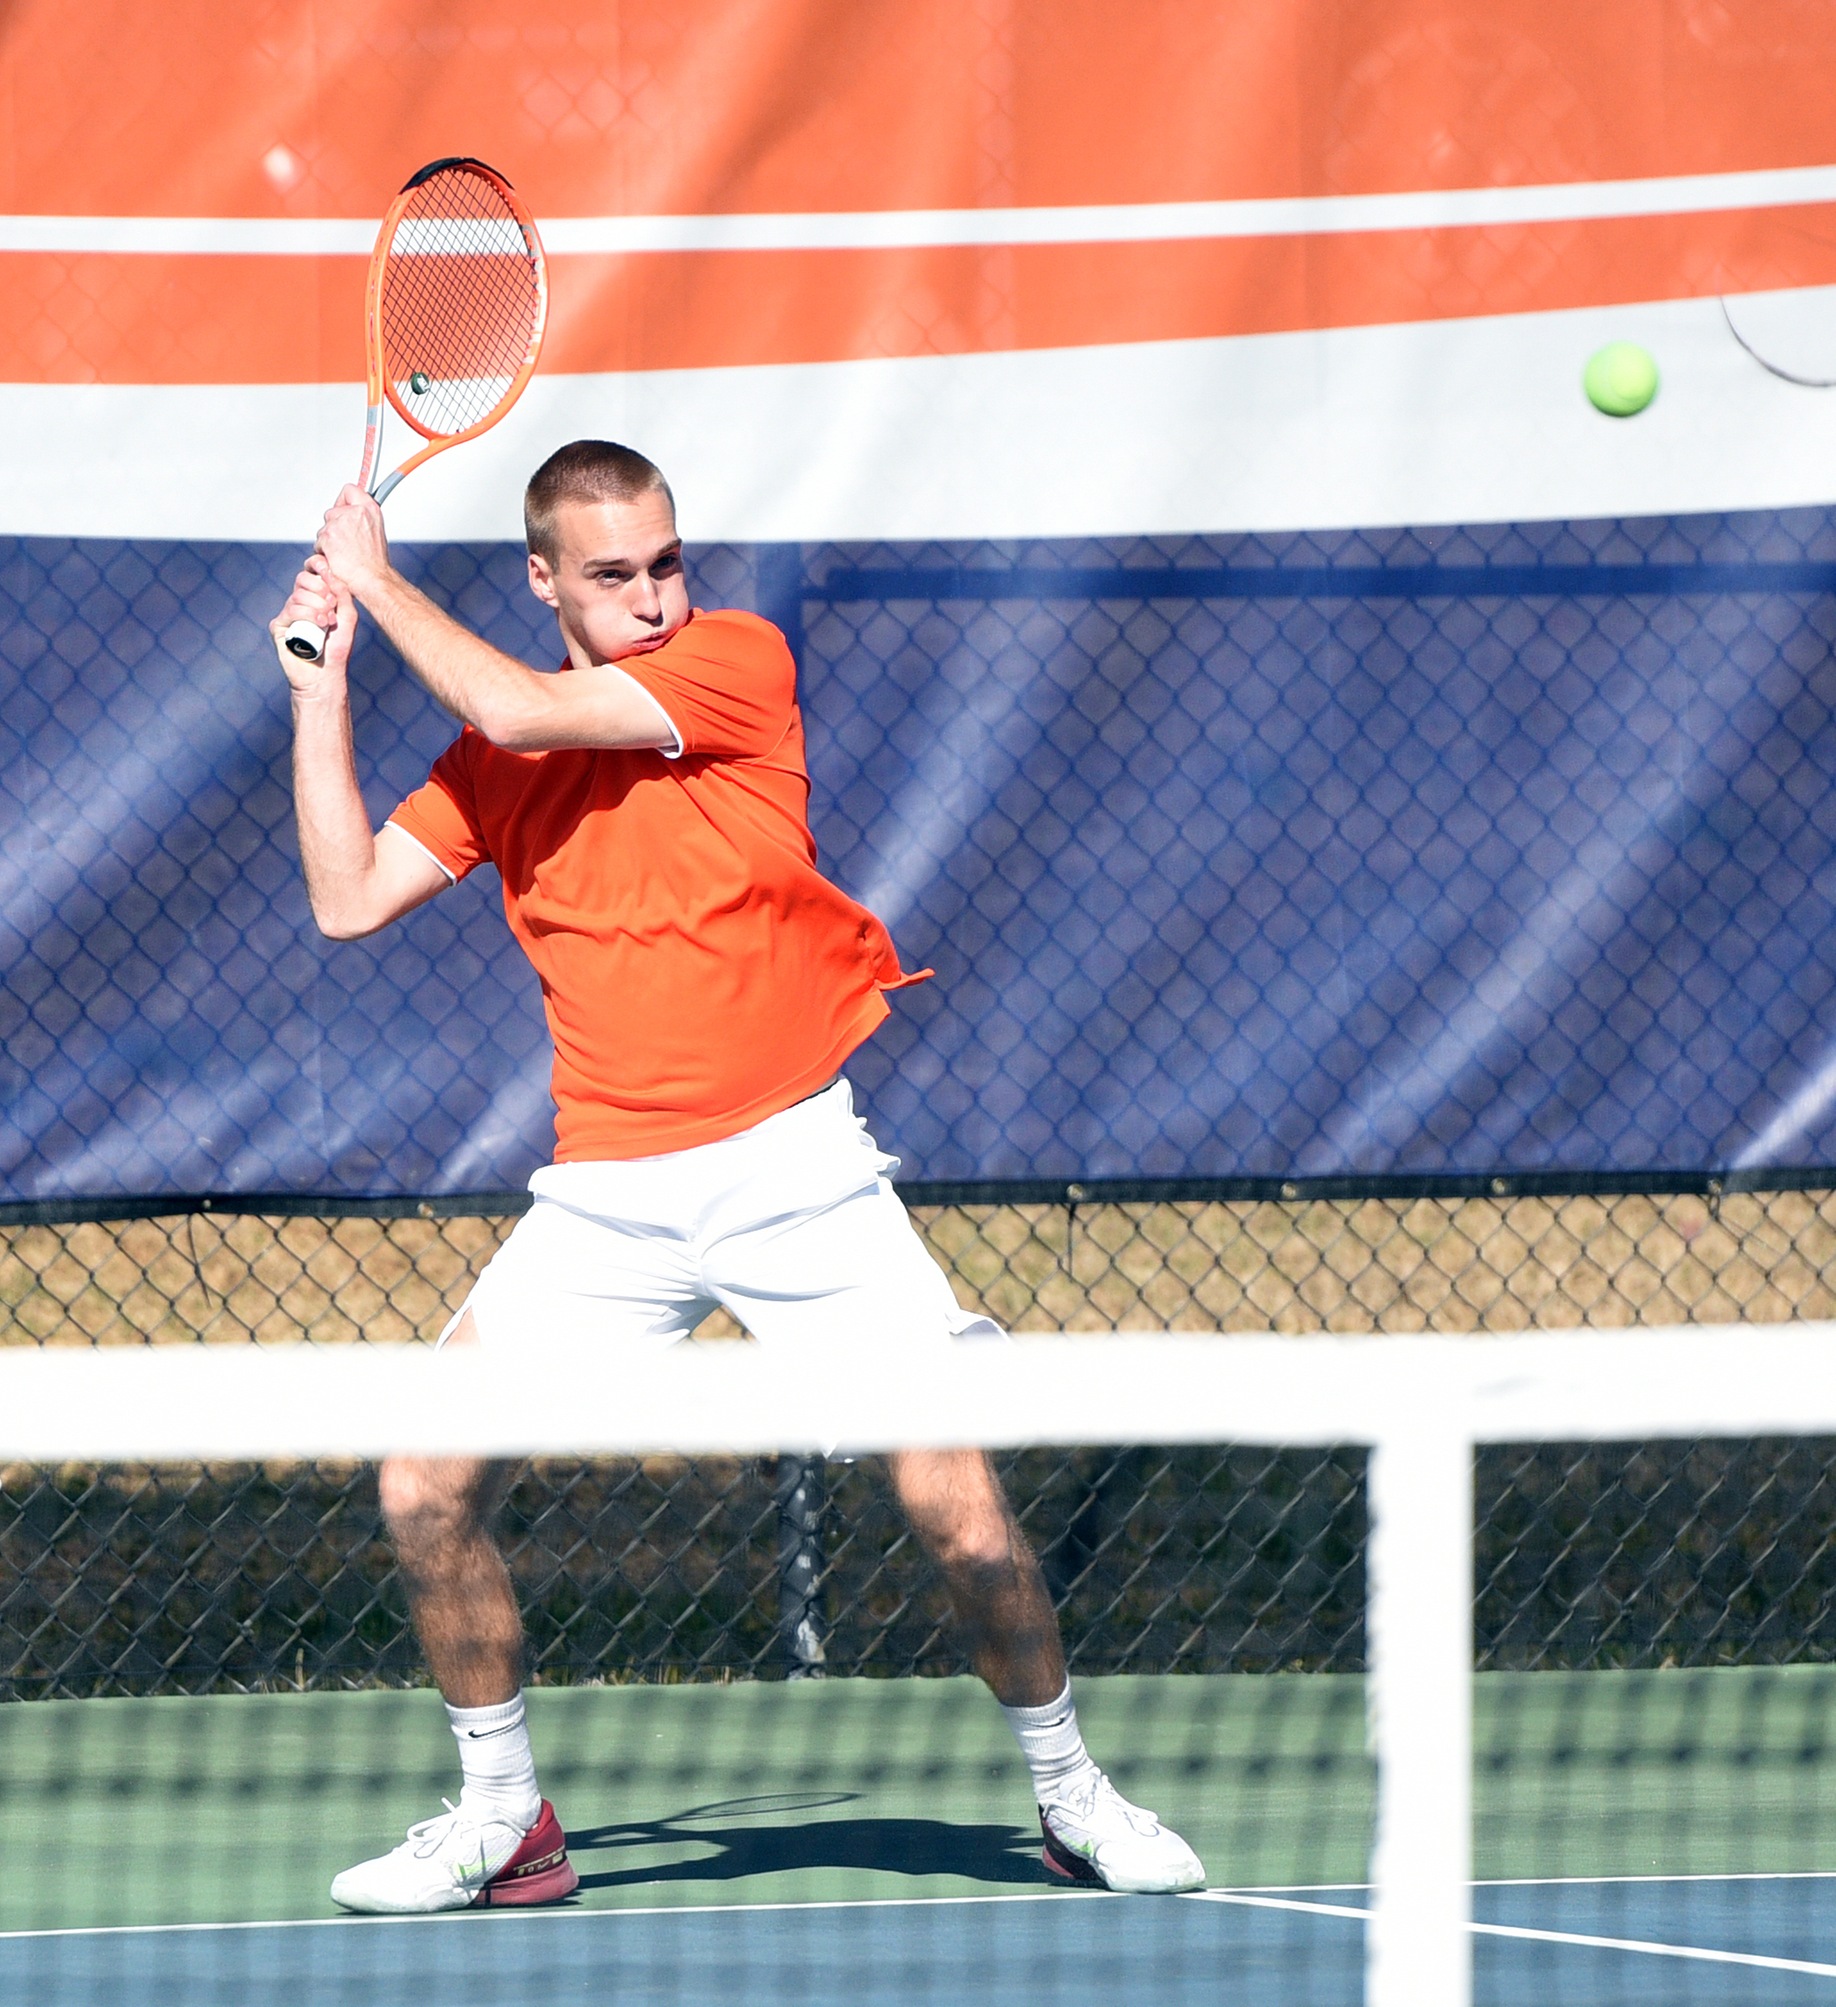 Matches Scheduled for Thursday Canceled, Match with Limestone Pushed to Sunday